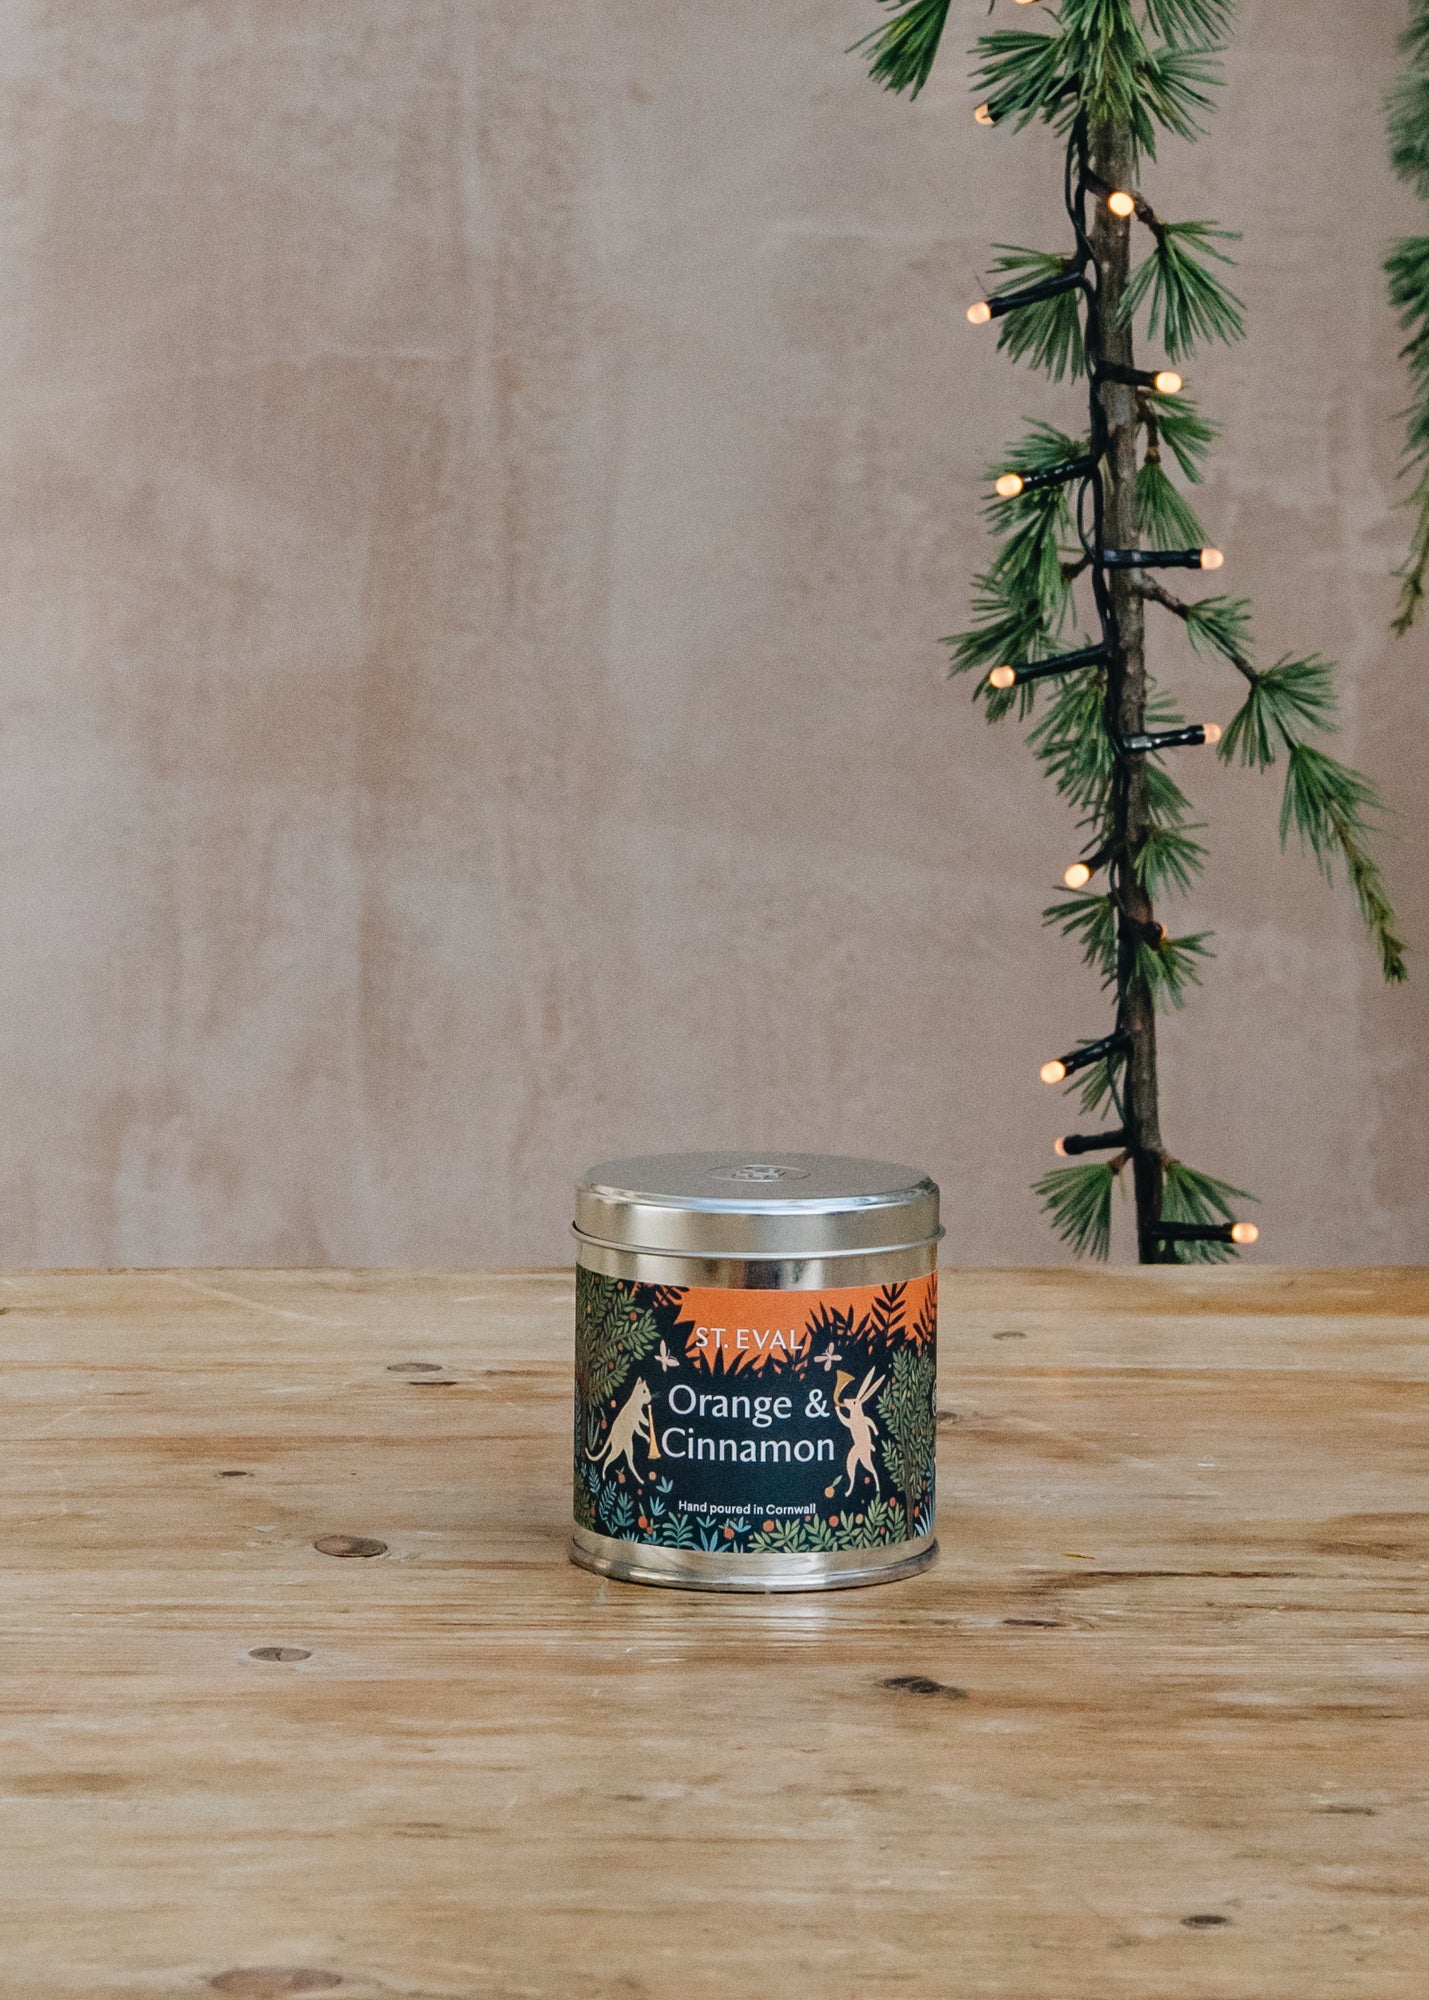 St Eval Tin Candle in Orange and Cinnamon